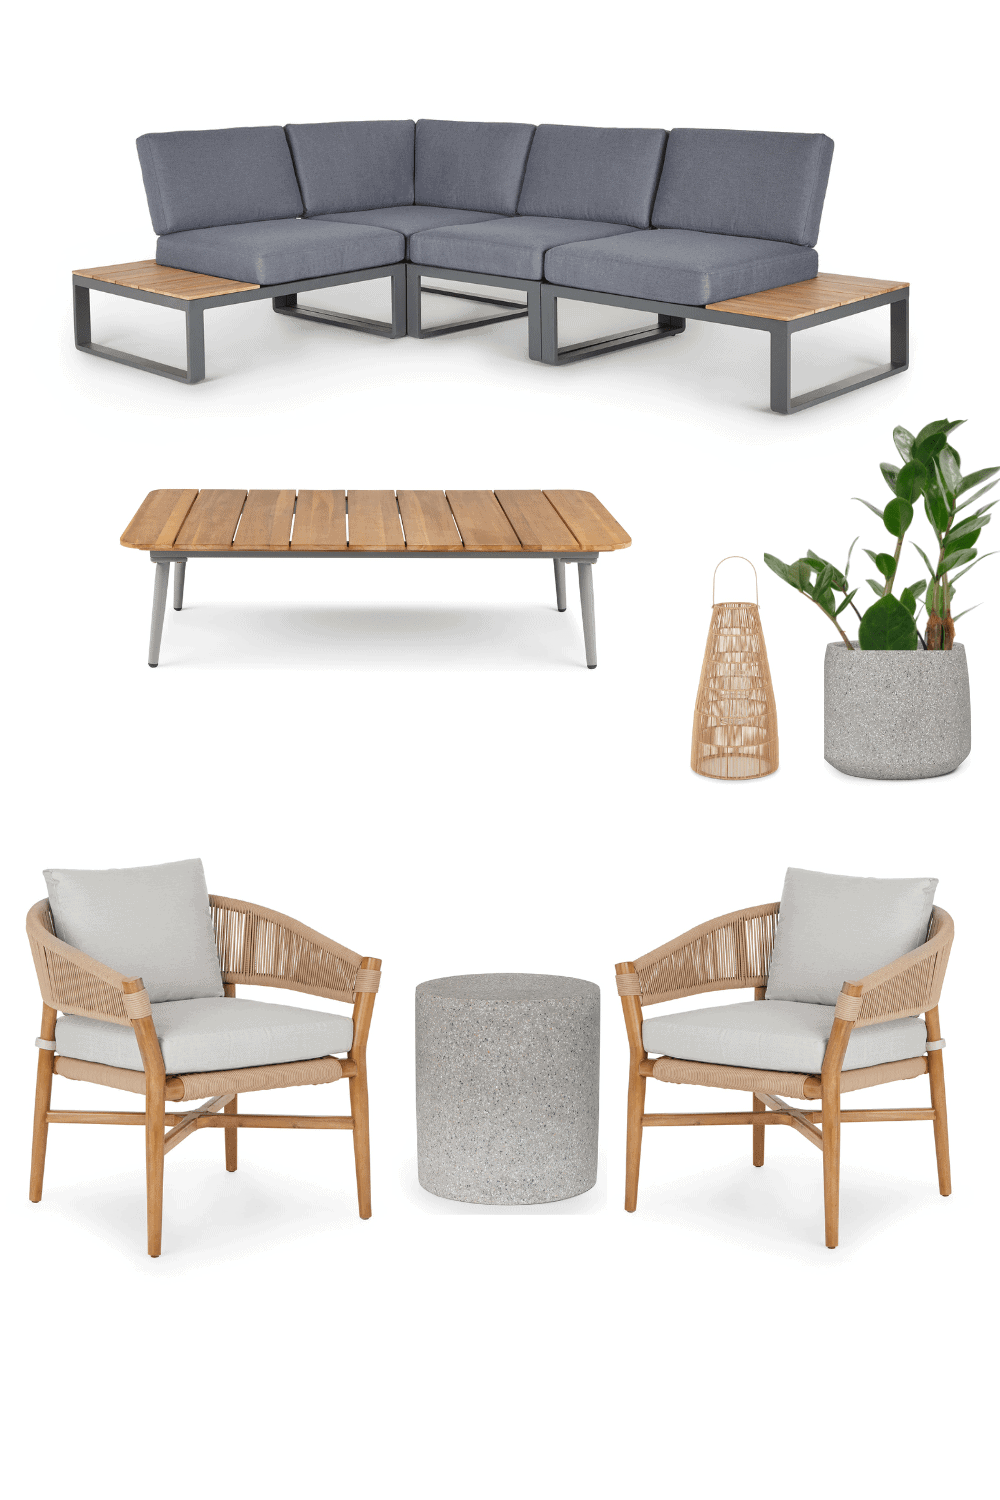 Choosing outdoor furniture for our backyard